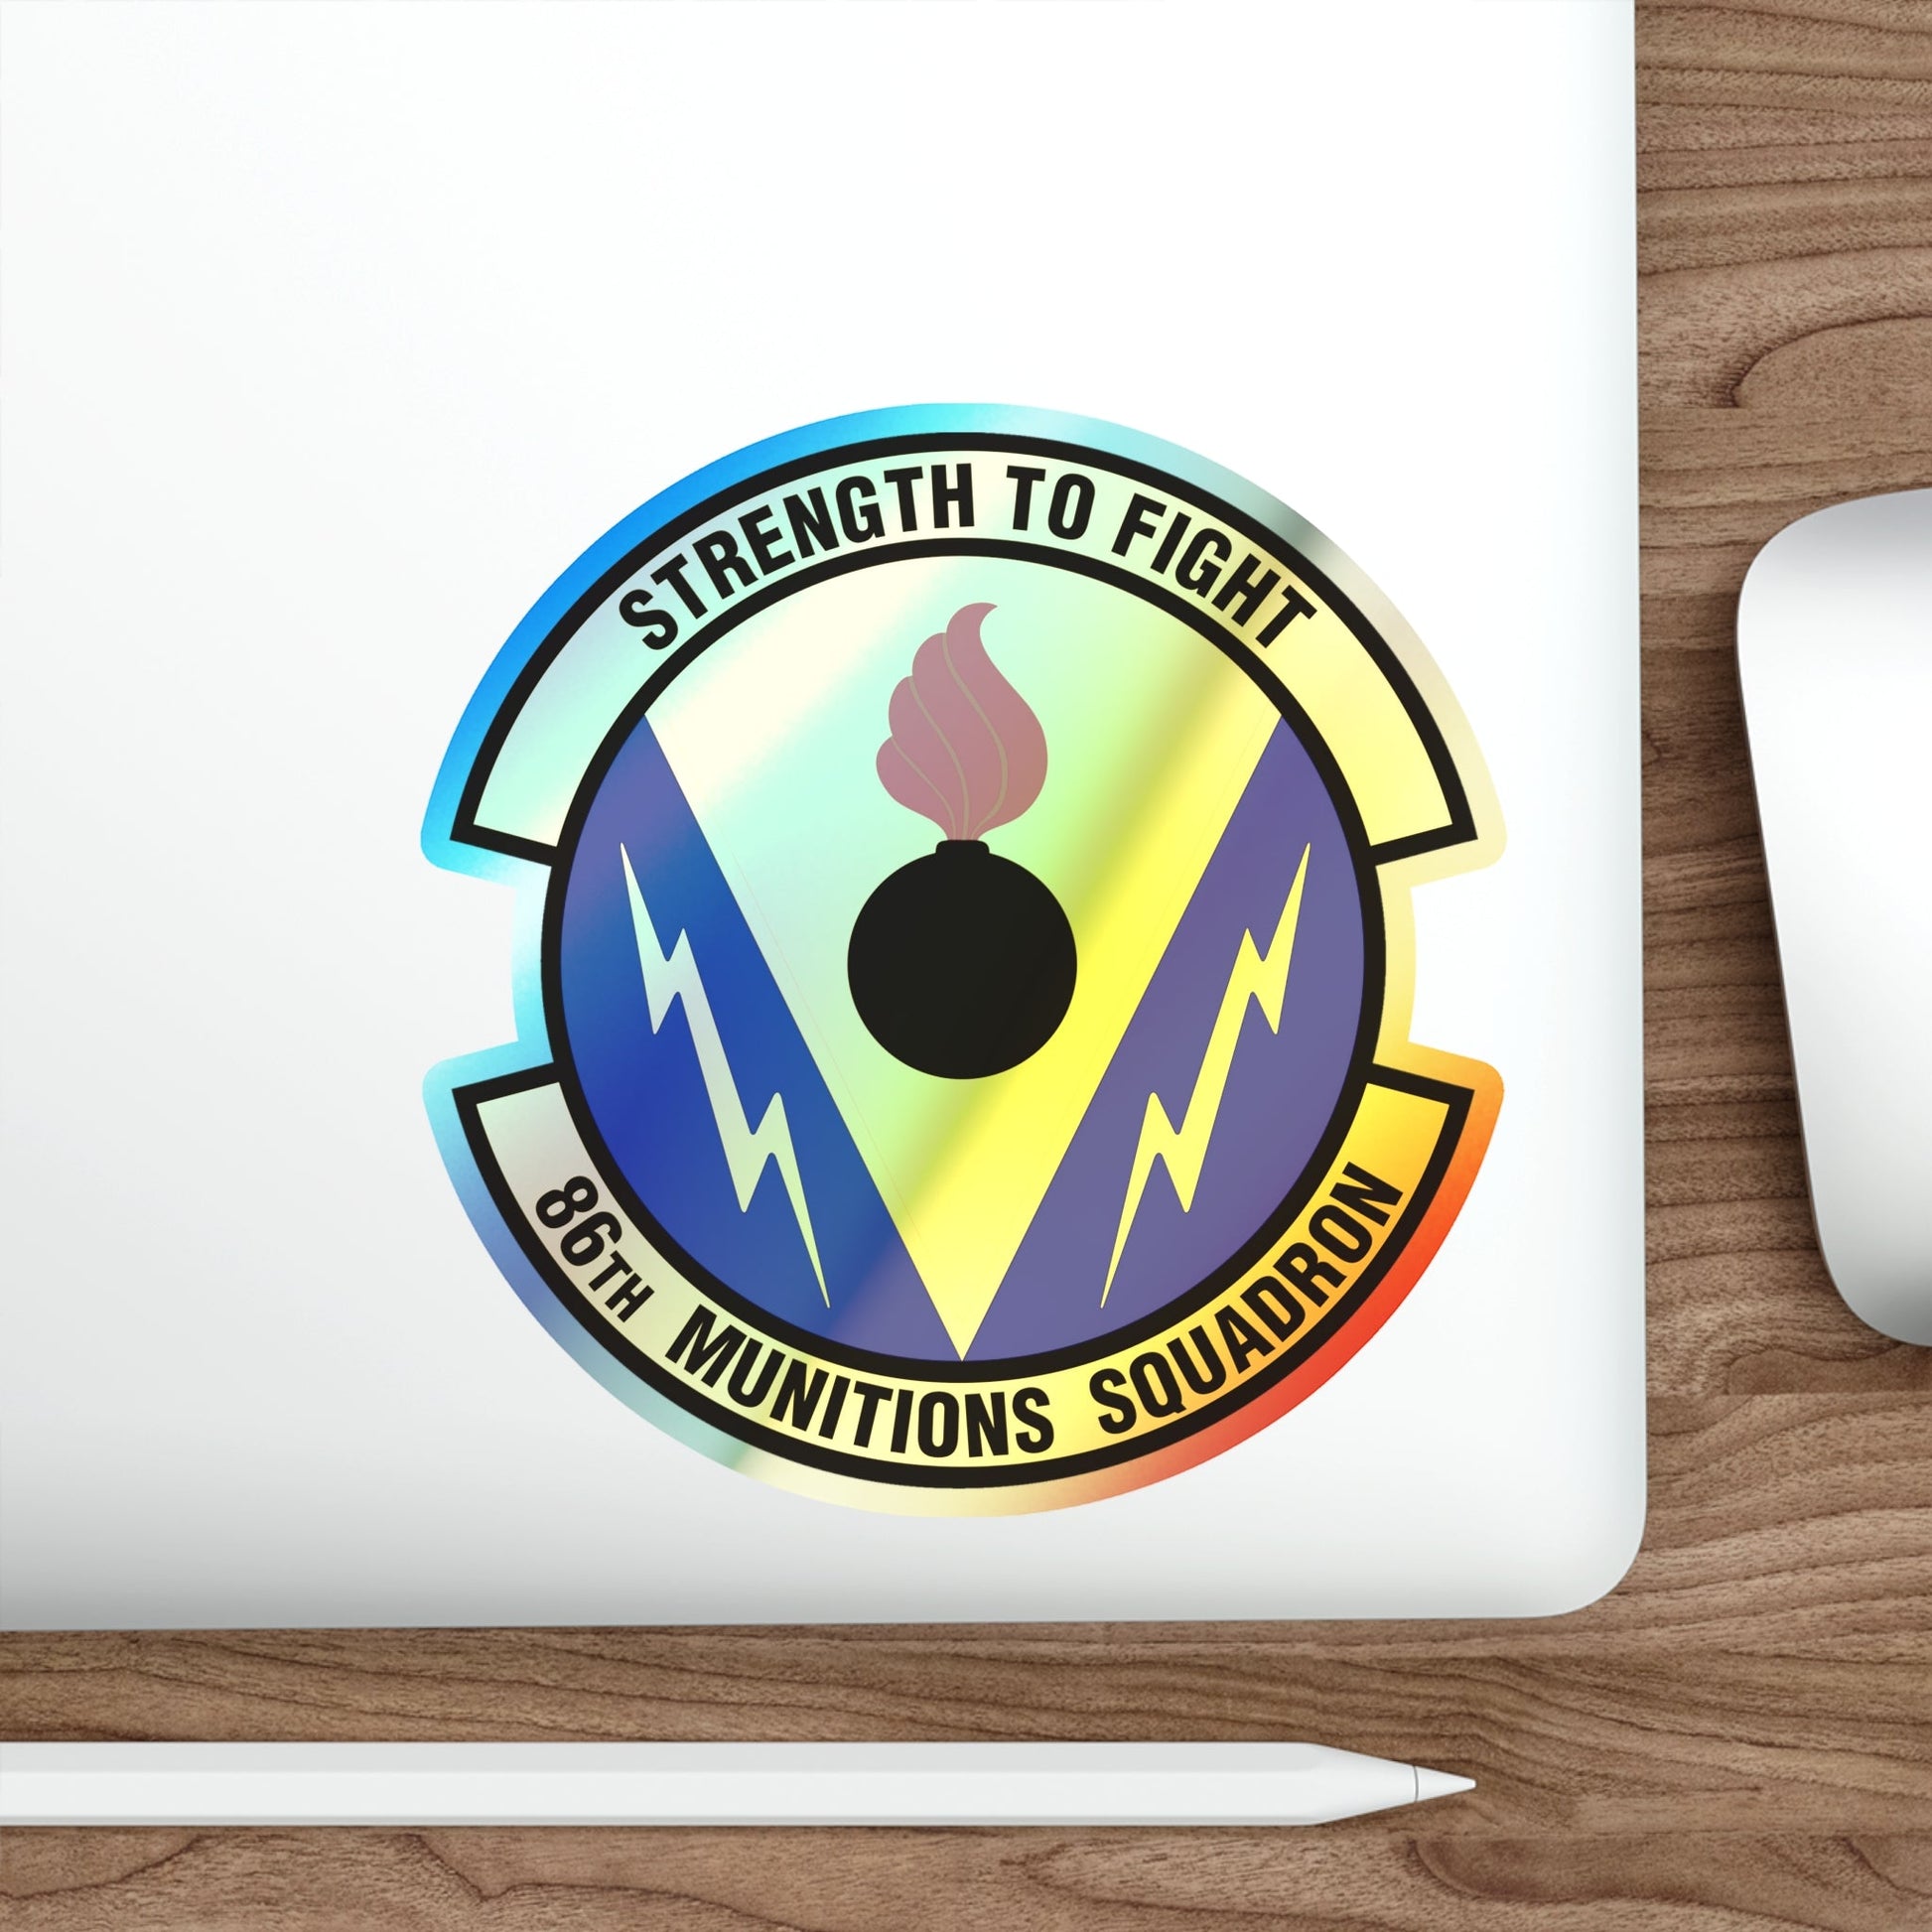 86th Munitions Squadron (U.S. Air Force) Holographic STICKER Die-Cut Vinyl Decal-The Sticker Space